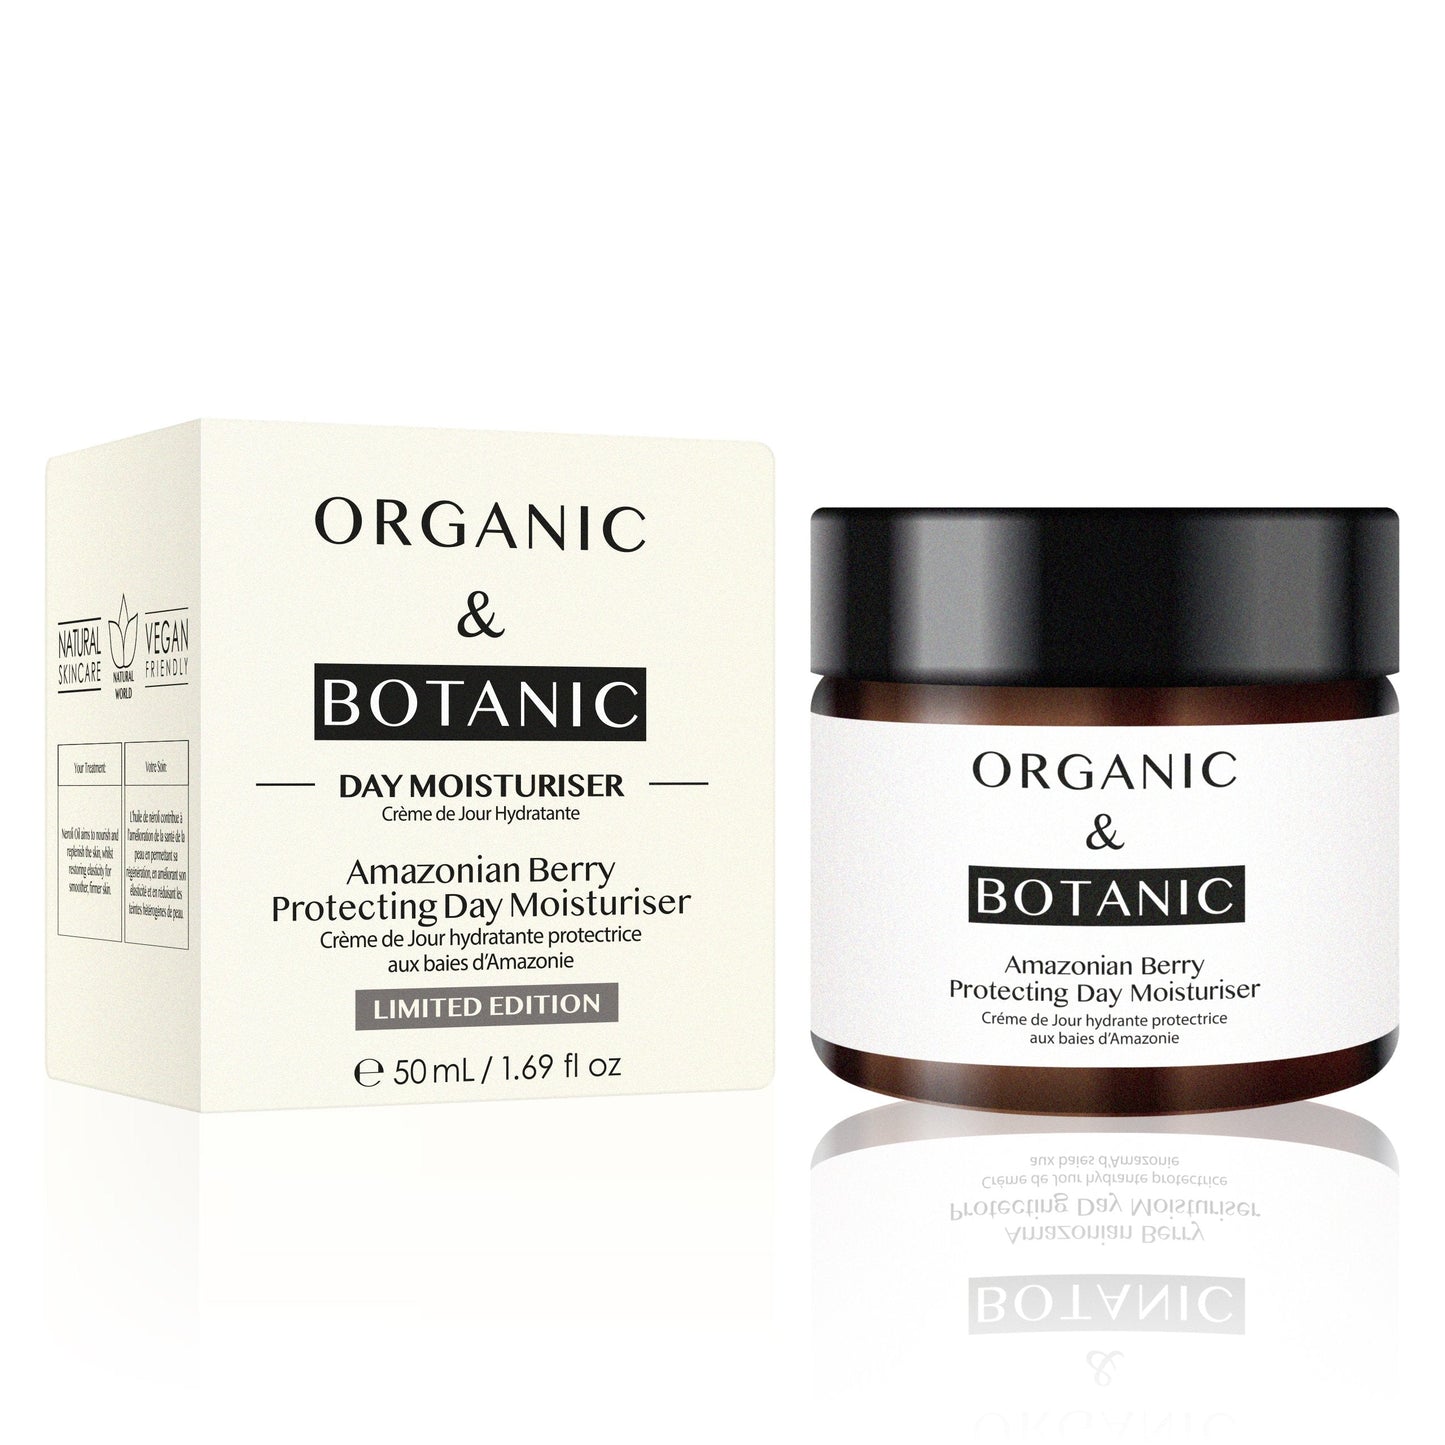 Limited Edition Amazonian Berry Protecting Day Moisturiser 50ml - Dr. Botanicals Skincare